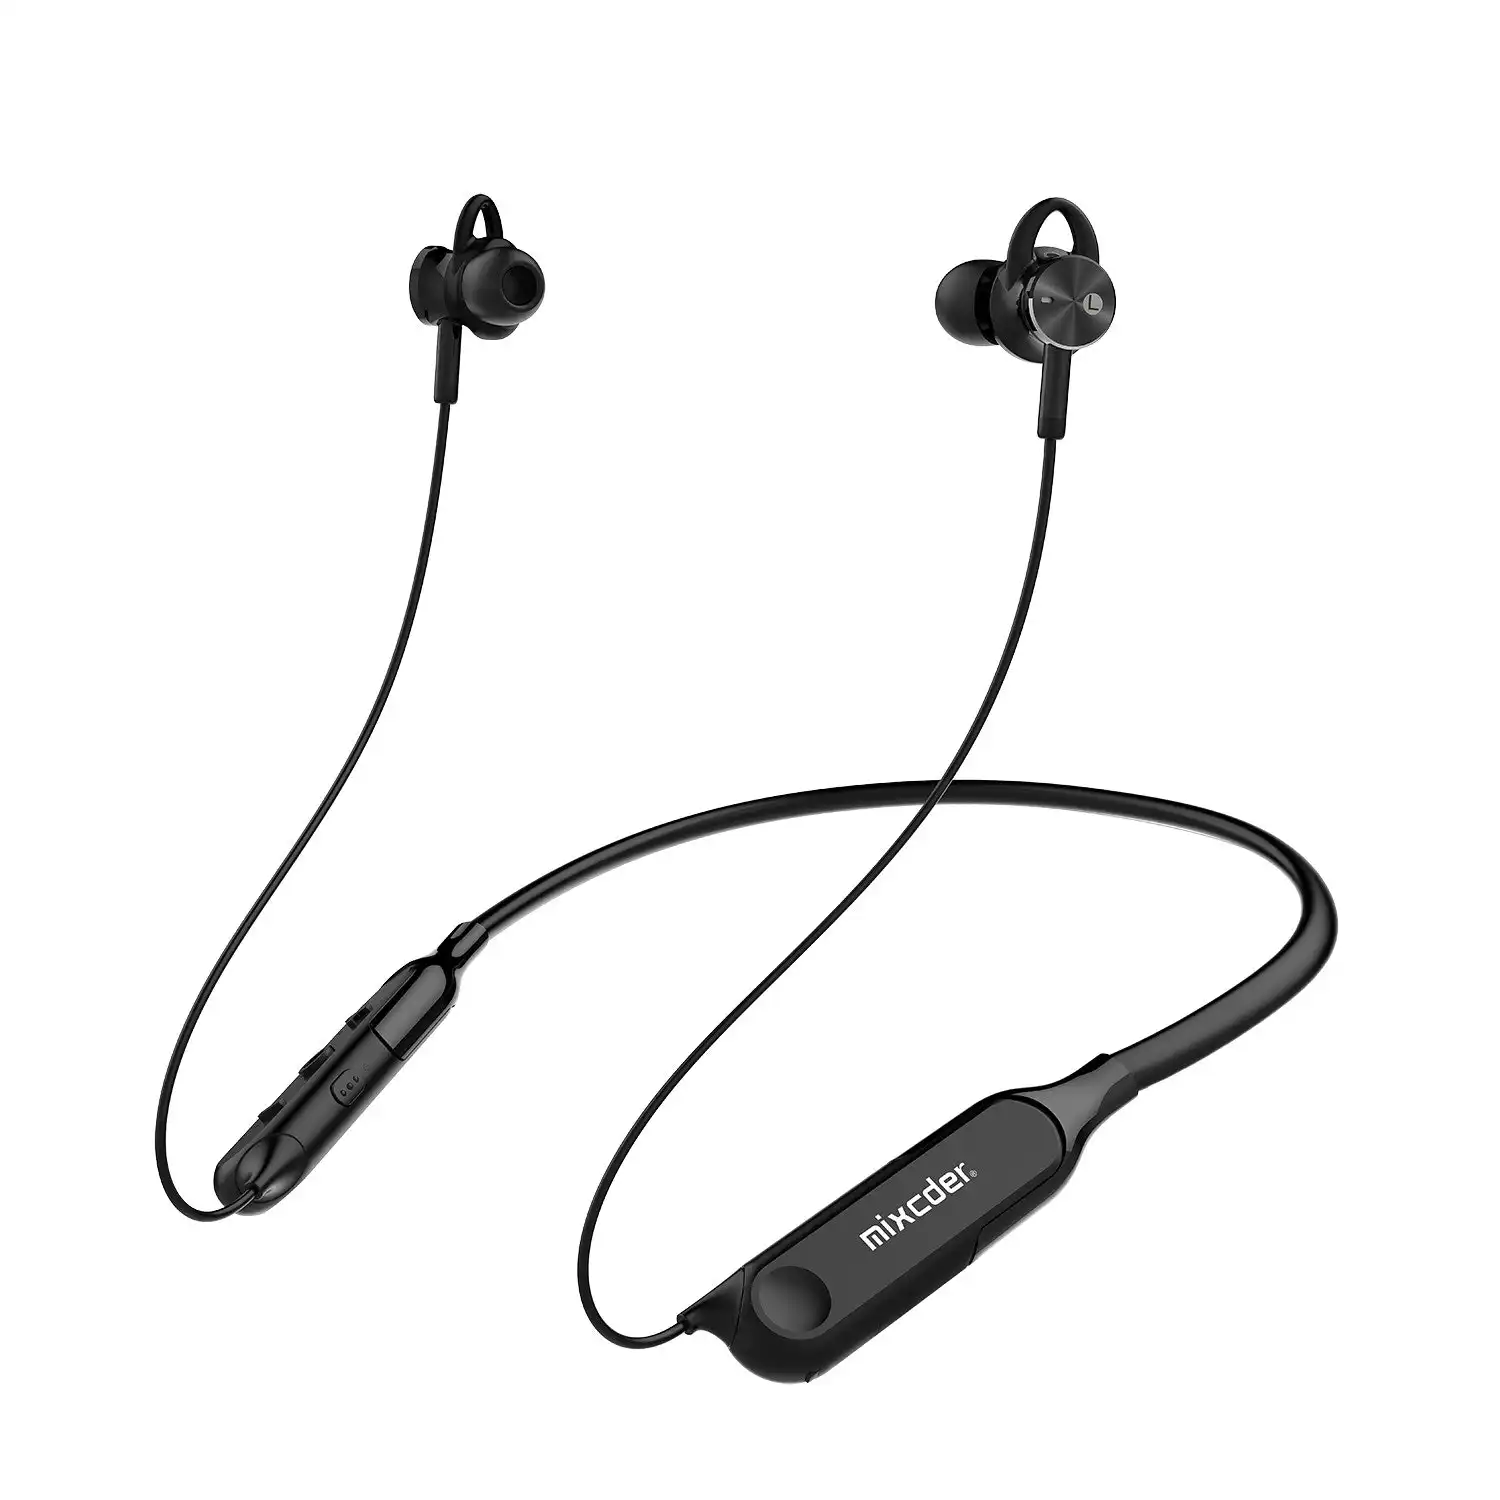 Mixcder RX ANC Bluetooth Earphone Active Noise Cancelling In-ear Headset with Mic Magnetic Neckband